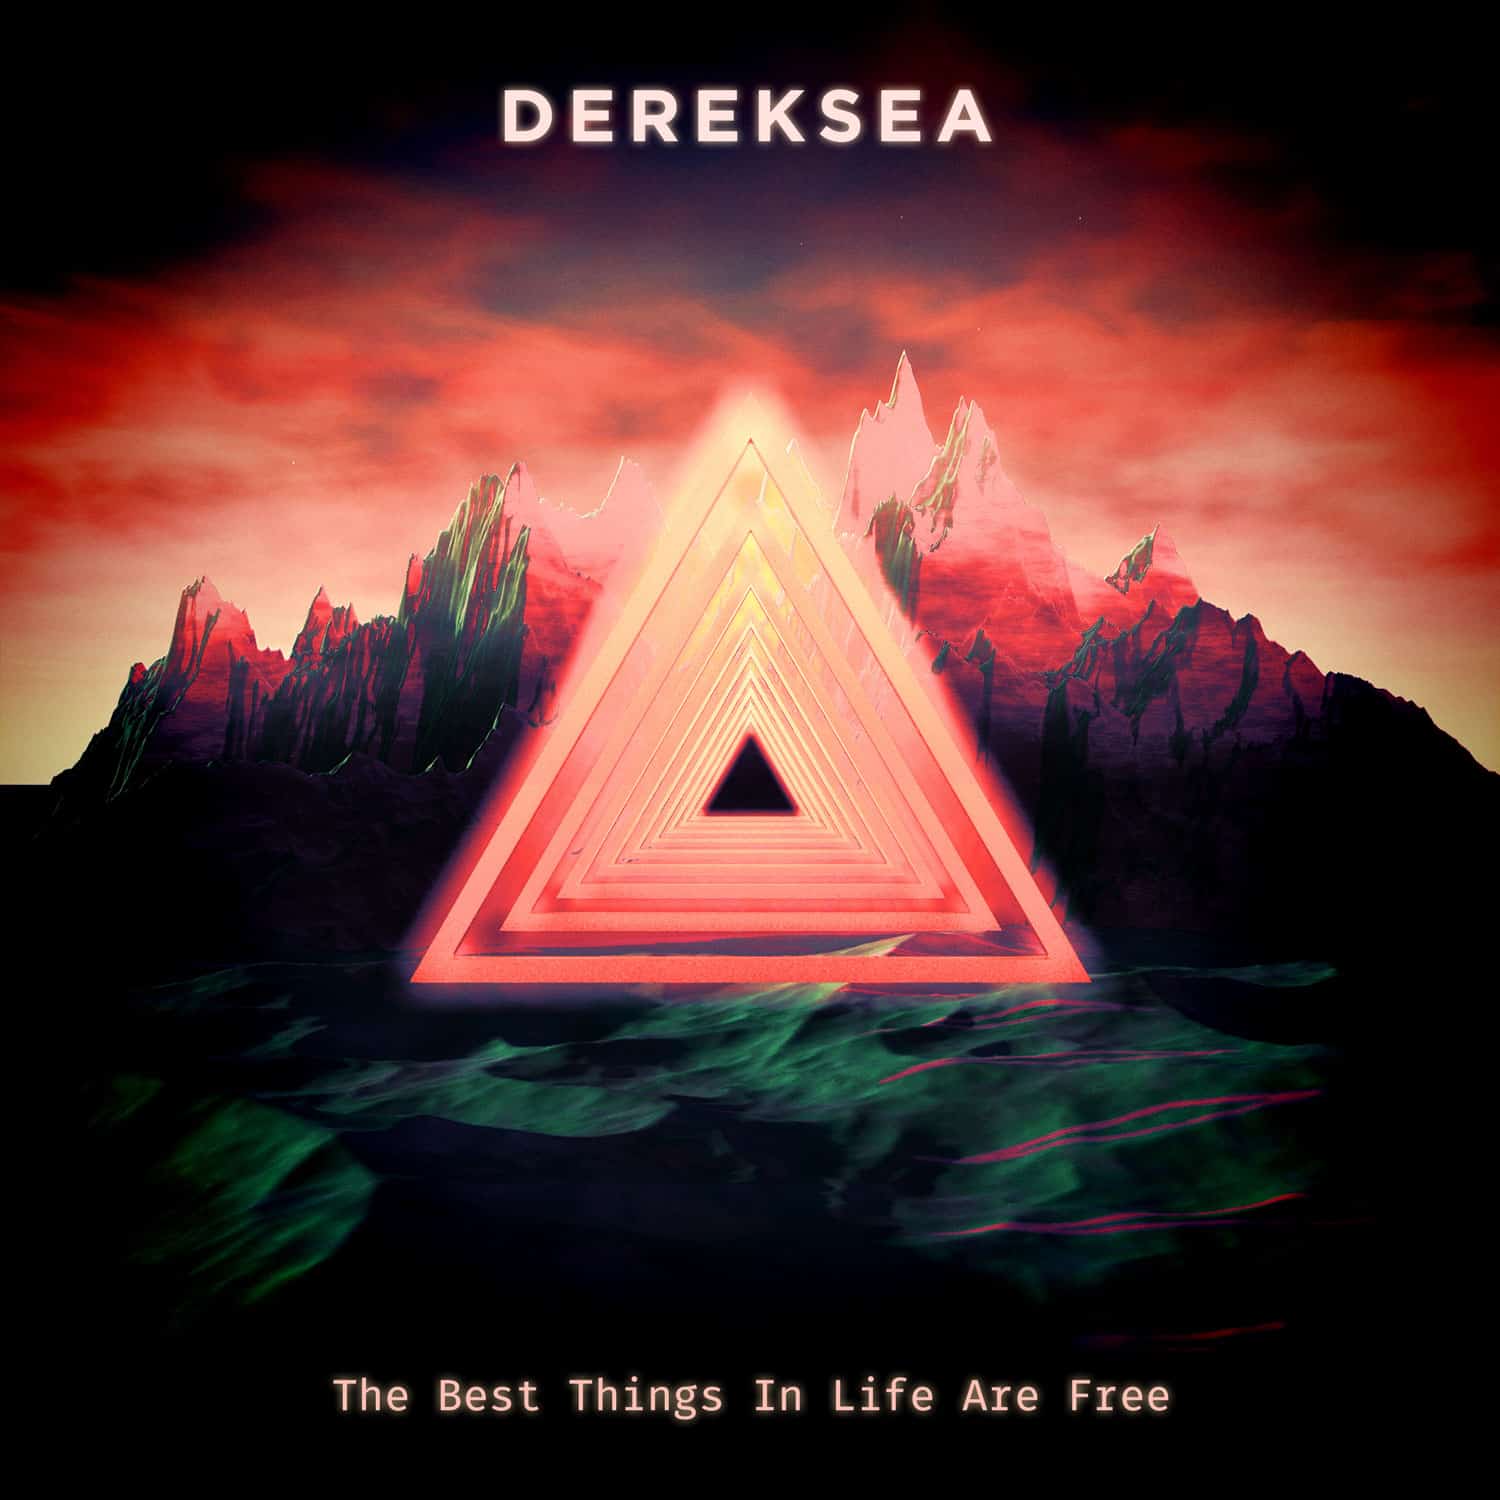 Derksea - the best things in life are free.